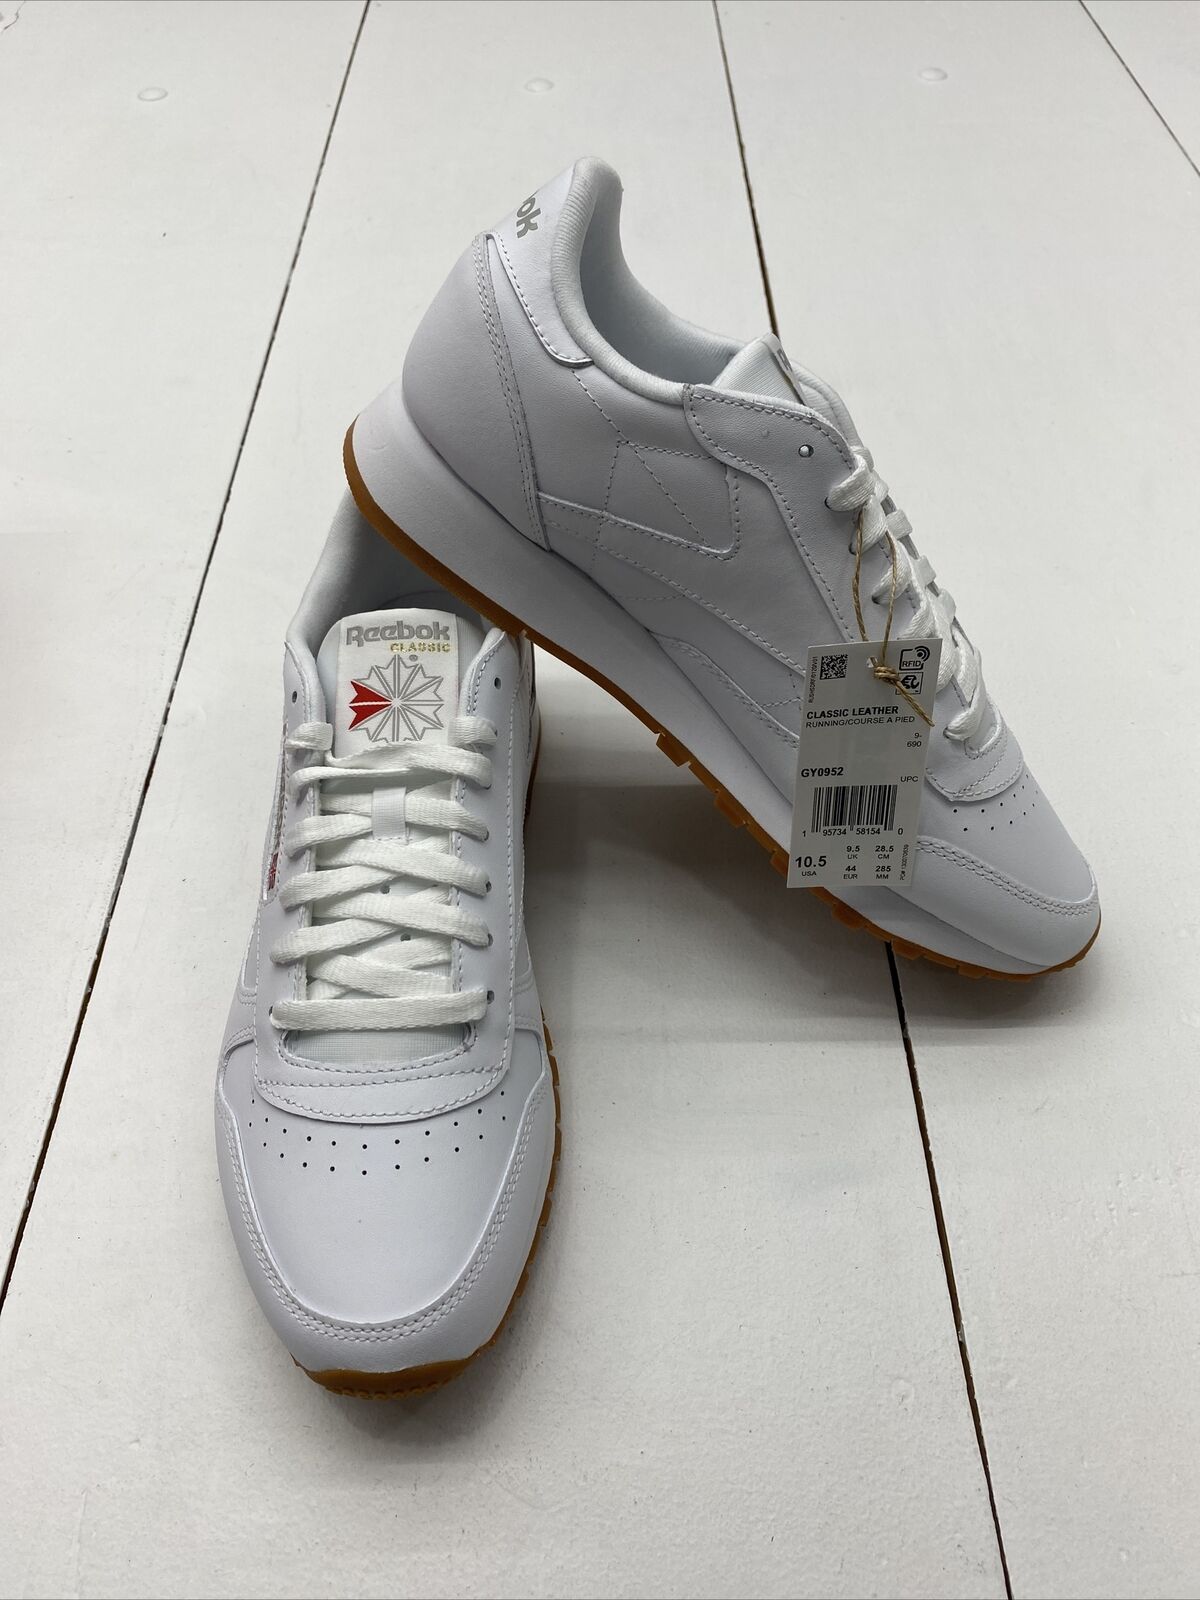 Reebok GY0952 White Unisex-Adult Classic Leather Sneaker Women Size 10 -  beyond exchange